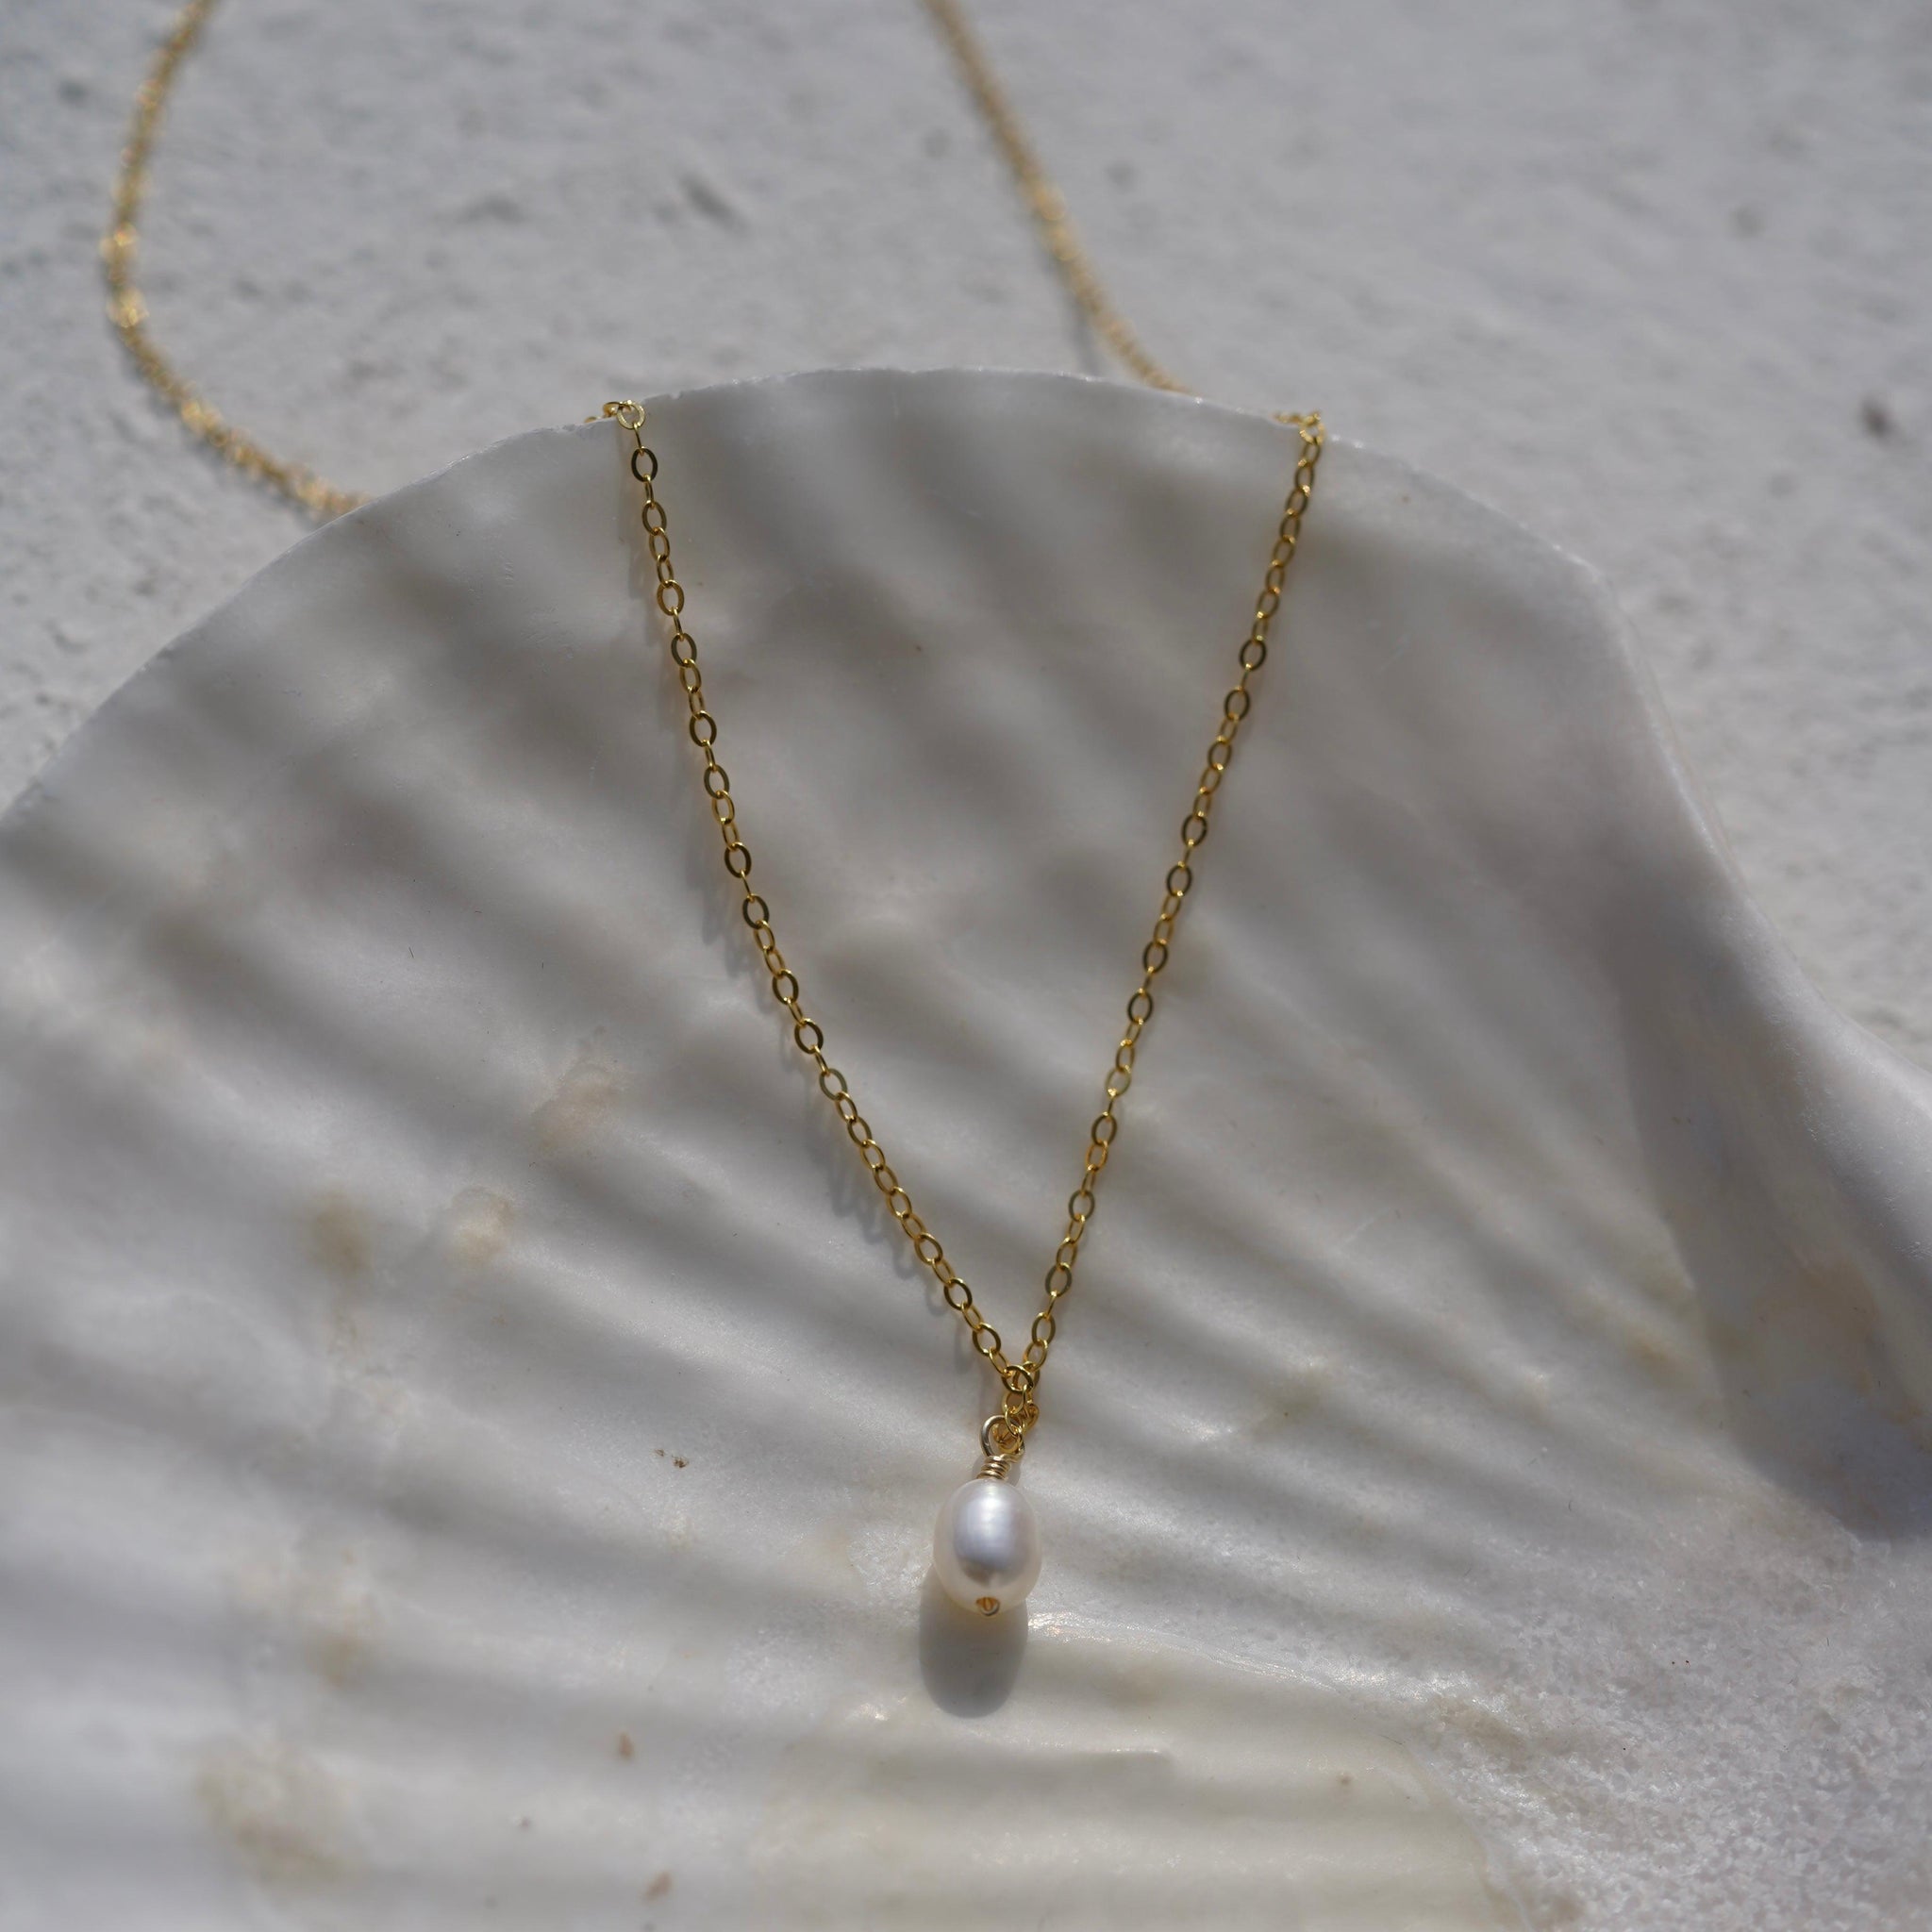 Necklace With Tiny Pearl Pendant